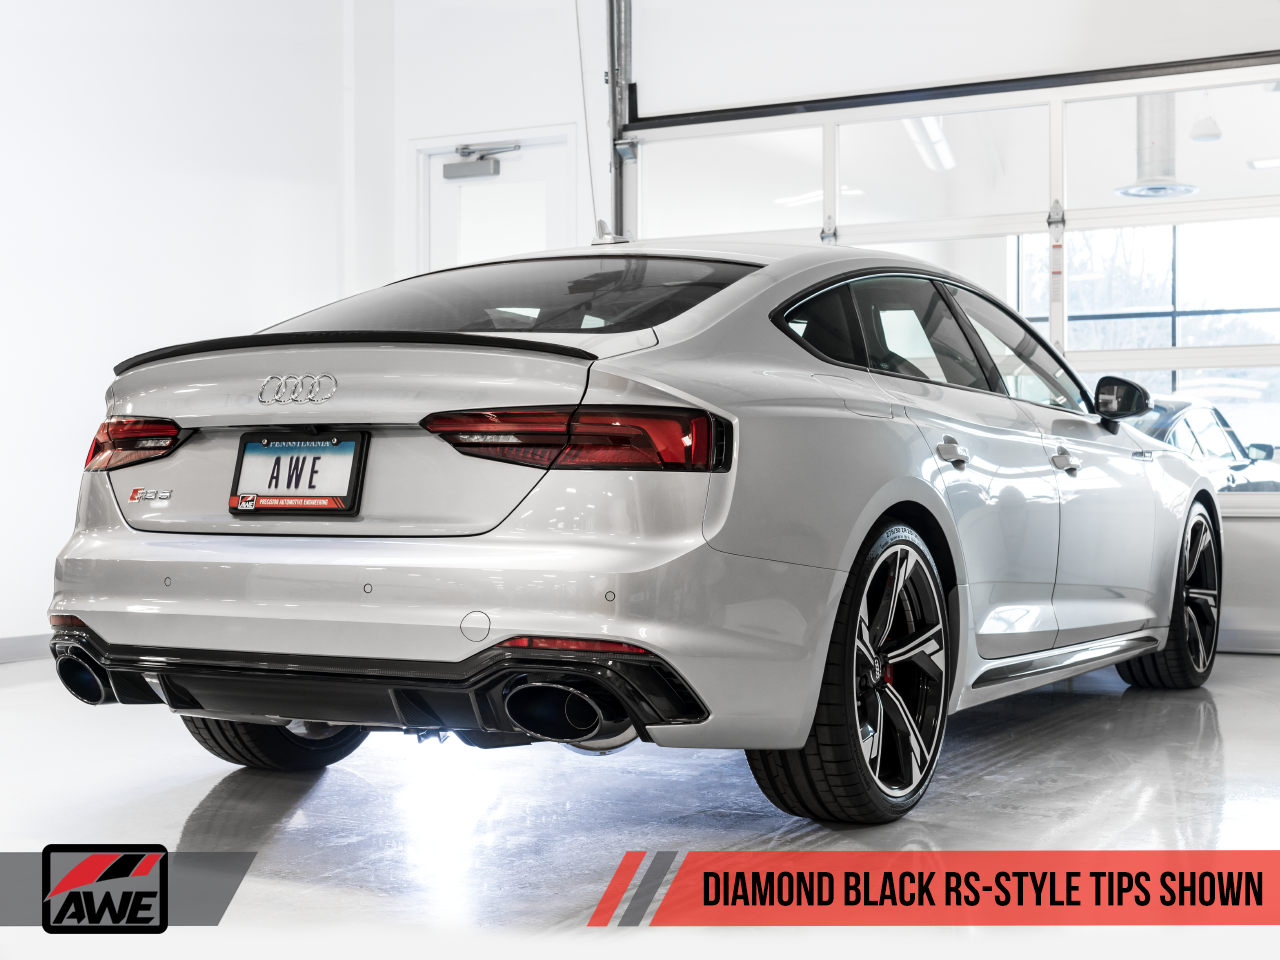 AWE Touring Edition Exhaust for Audi B9 RS 5 Coupe - Resonated for Performance Catalysts - Diamond Black RS-style Tips - Motorsports LA